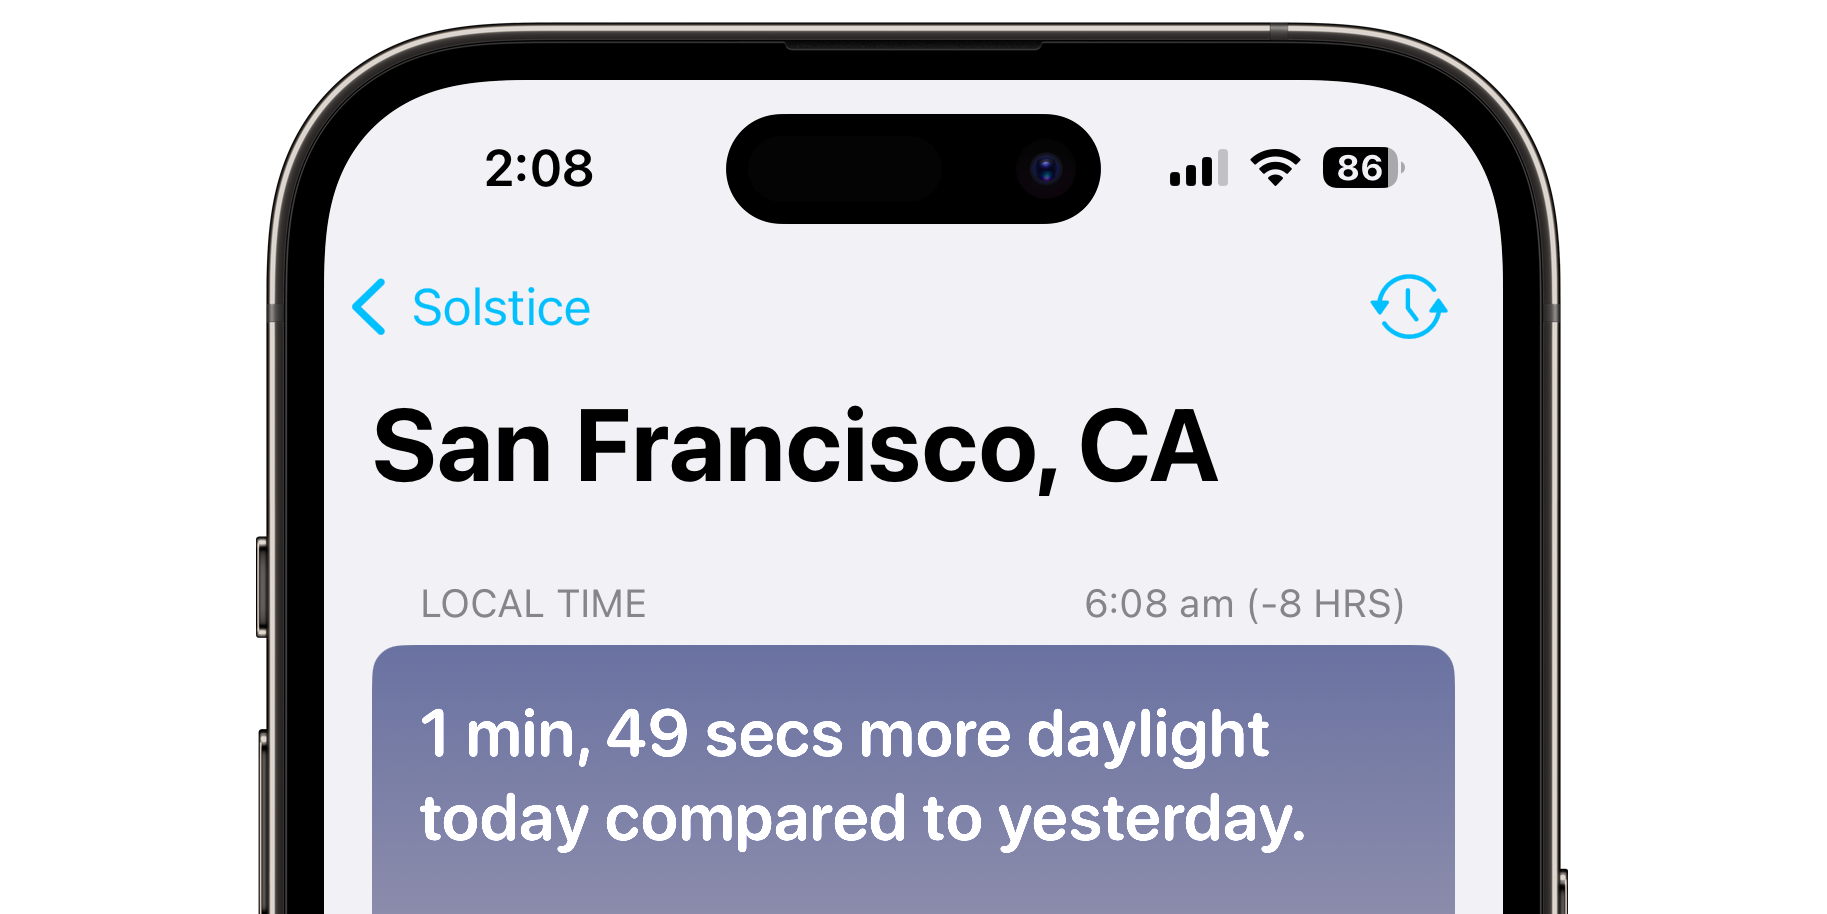 A zoomed in screenshot of Solstice's time zone indicator at the top of its detail view, showing San Francisco's local time, which is 8 hours behind London time.